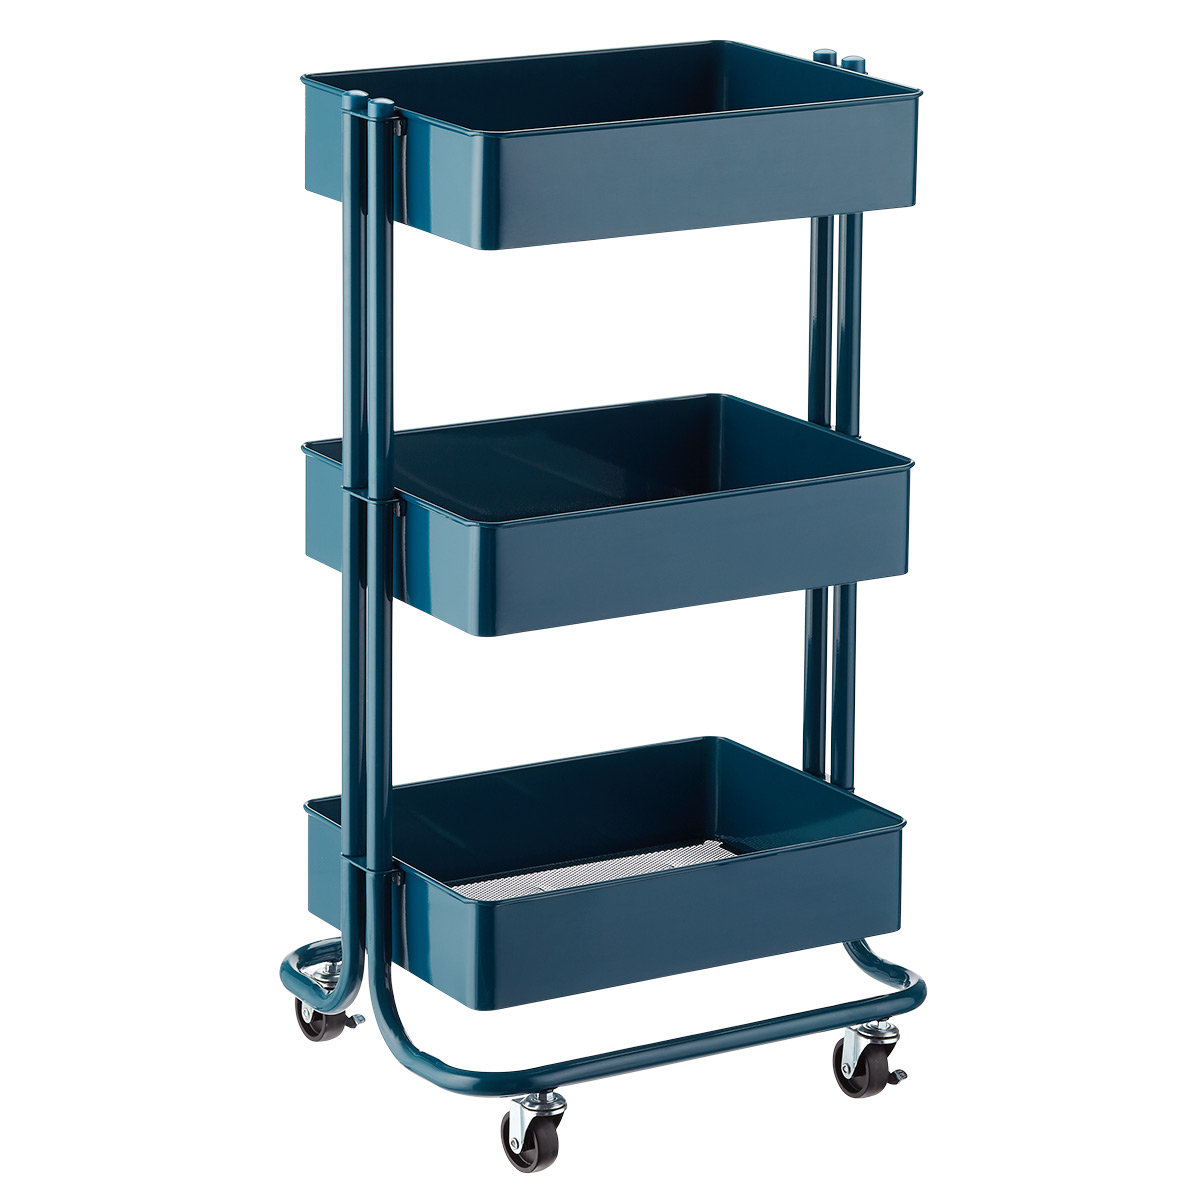 Teal 3-Tier Cart Toy Solution | The Container Store